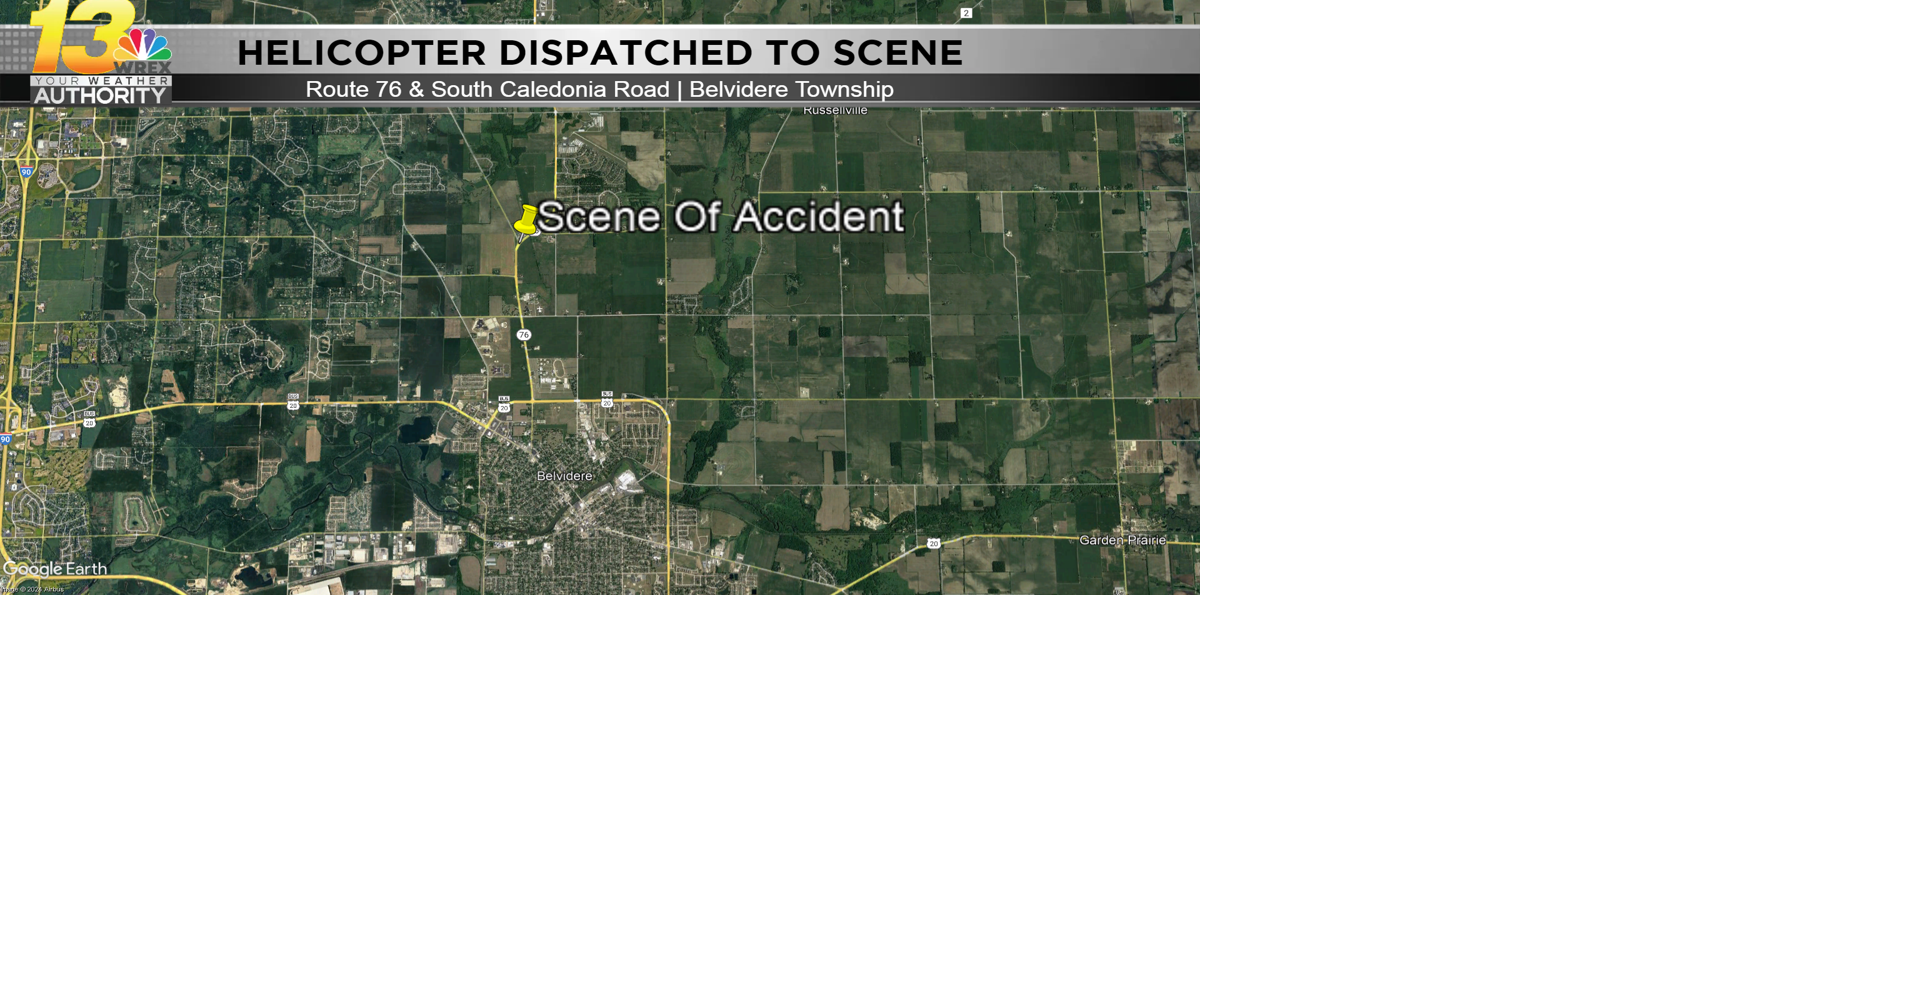 Semi-truck accident reported at Route 76 and South Caledonia Road – WREX.com